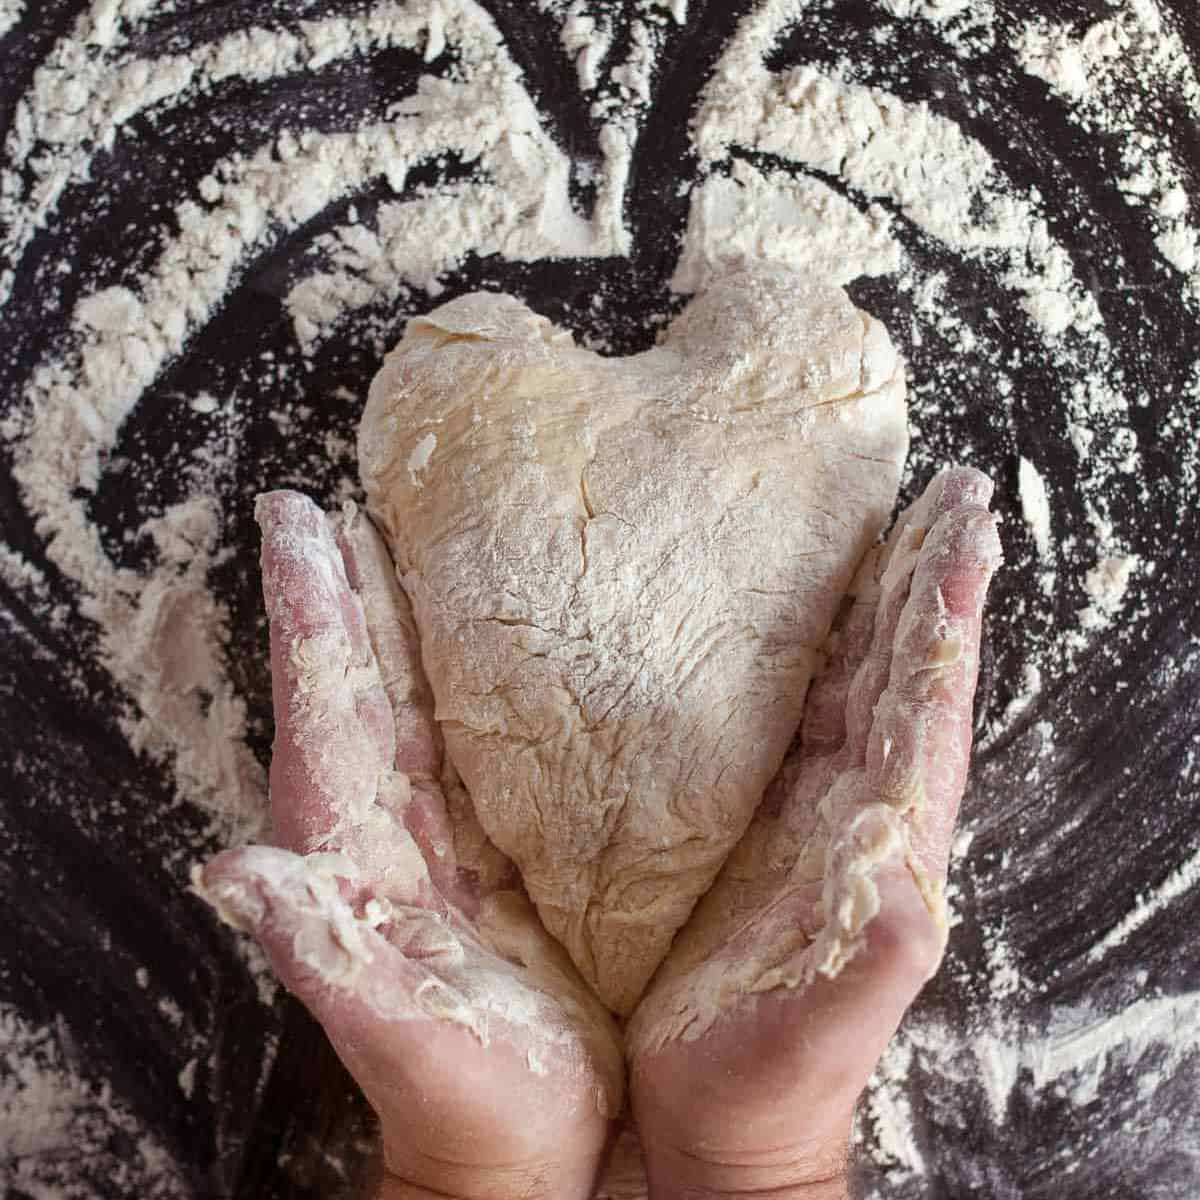 Pizza dough on a floured surface shaped into a heart with two hands holding it on the outside.